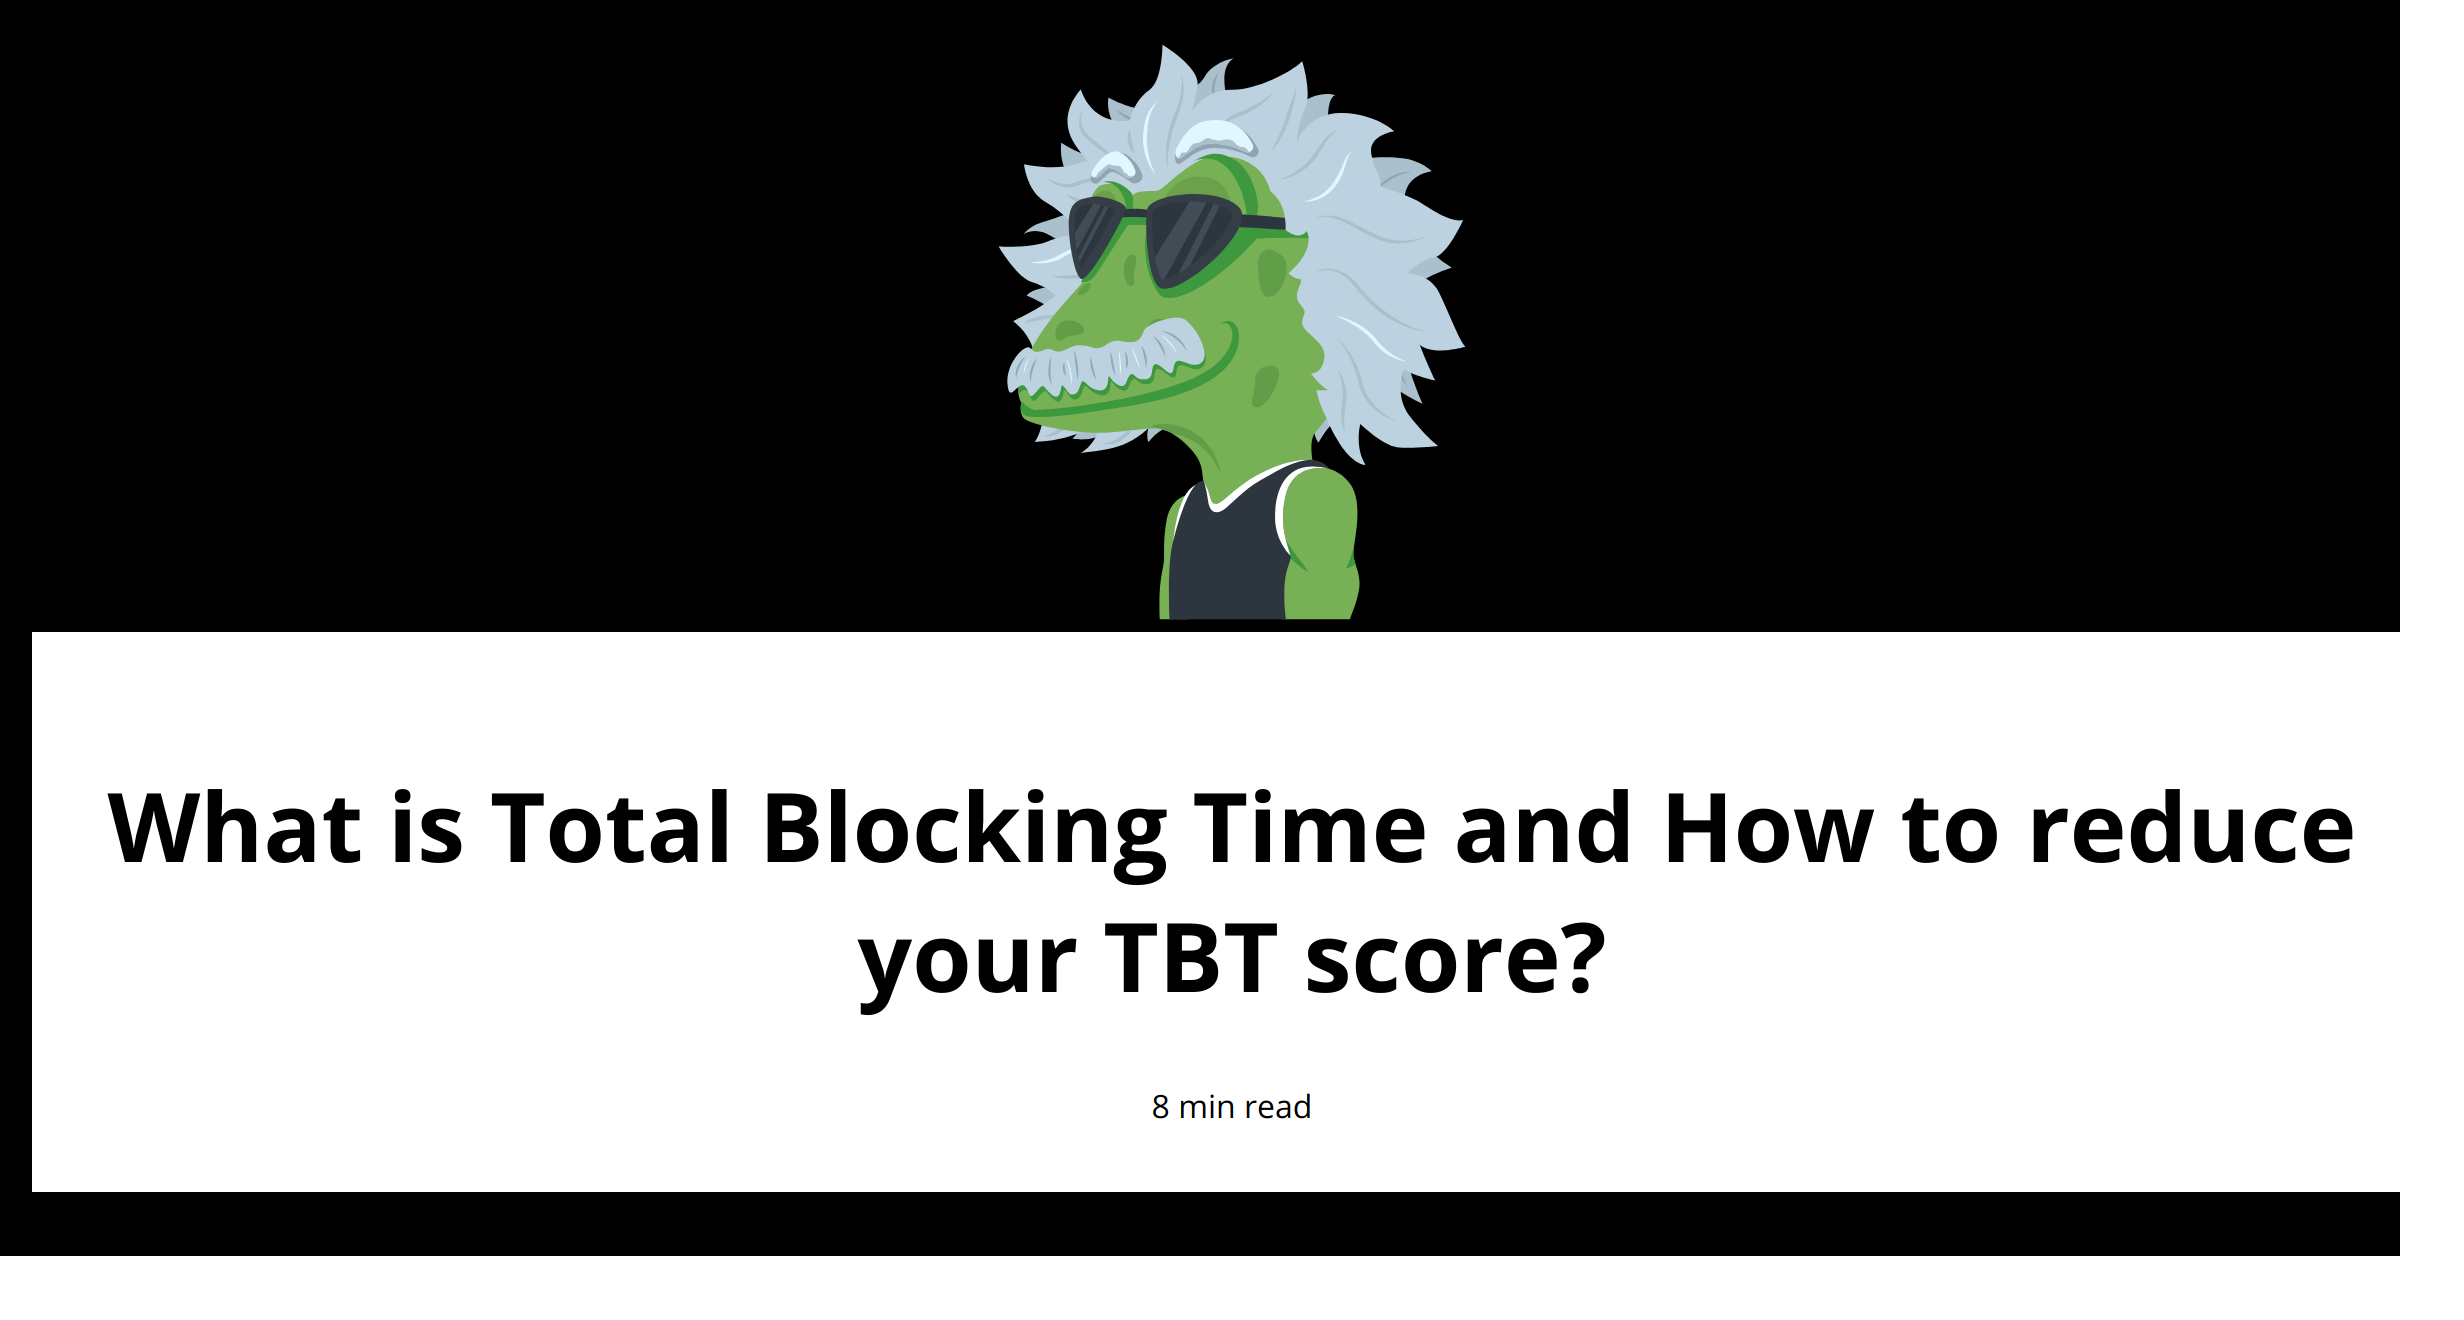 What is Total Blocking Time and How to reduce your TBT score?